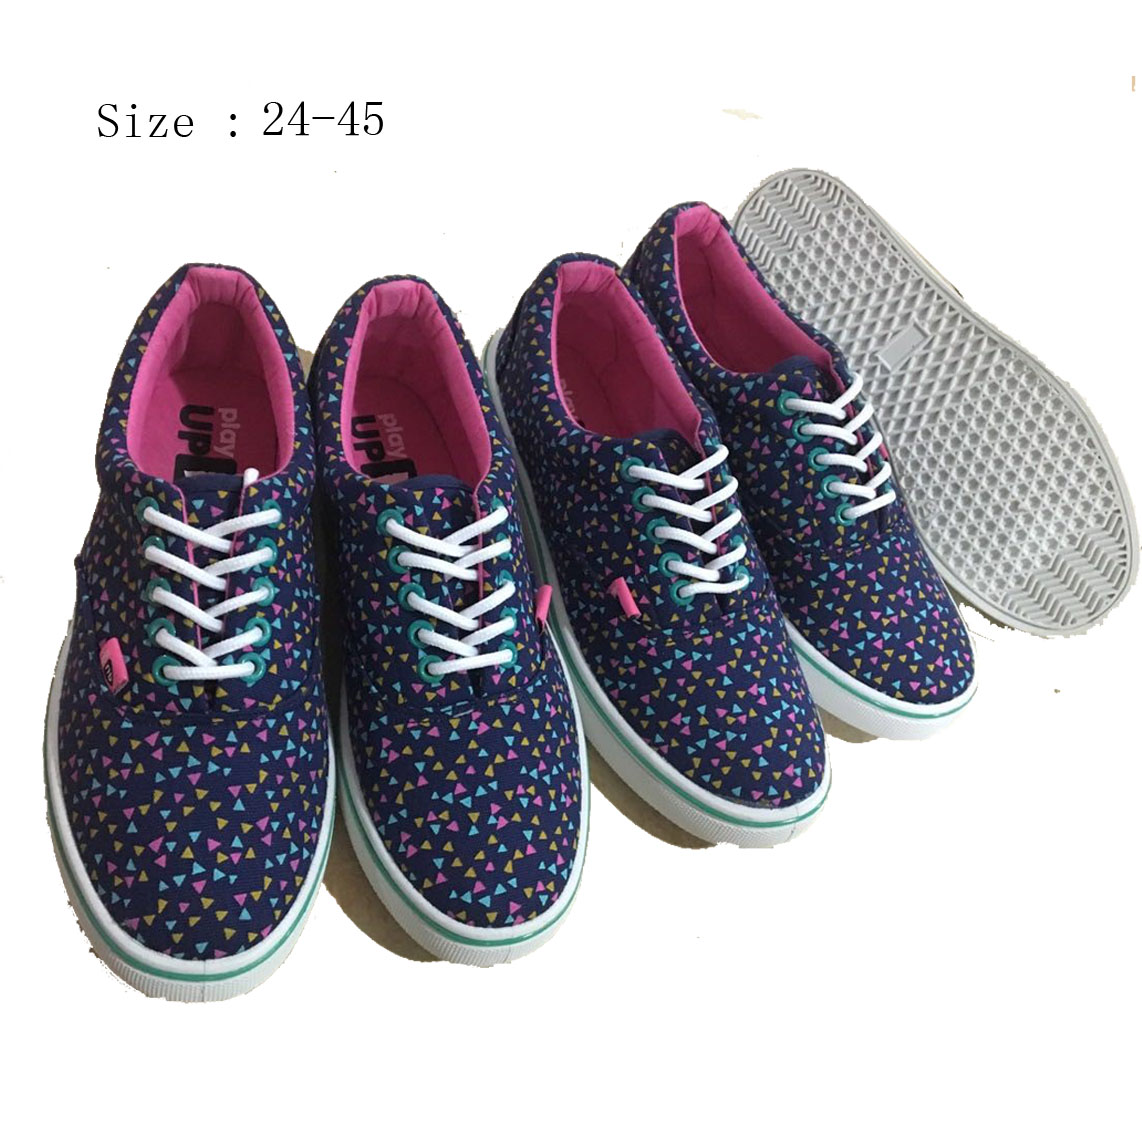 New design women casual shoes canvas shoes (HP19517-10) 1. ITEM...